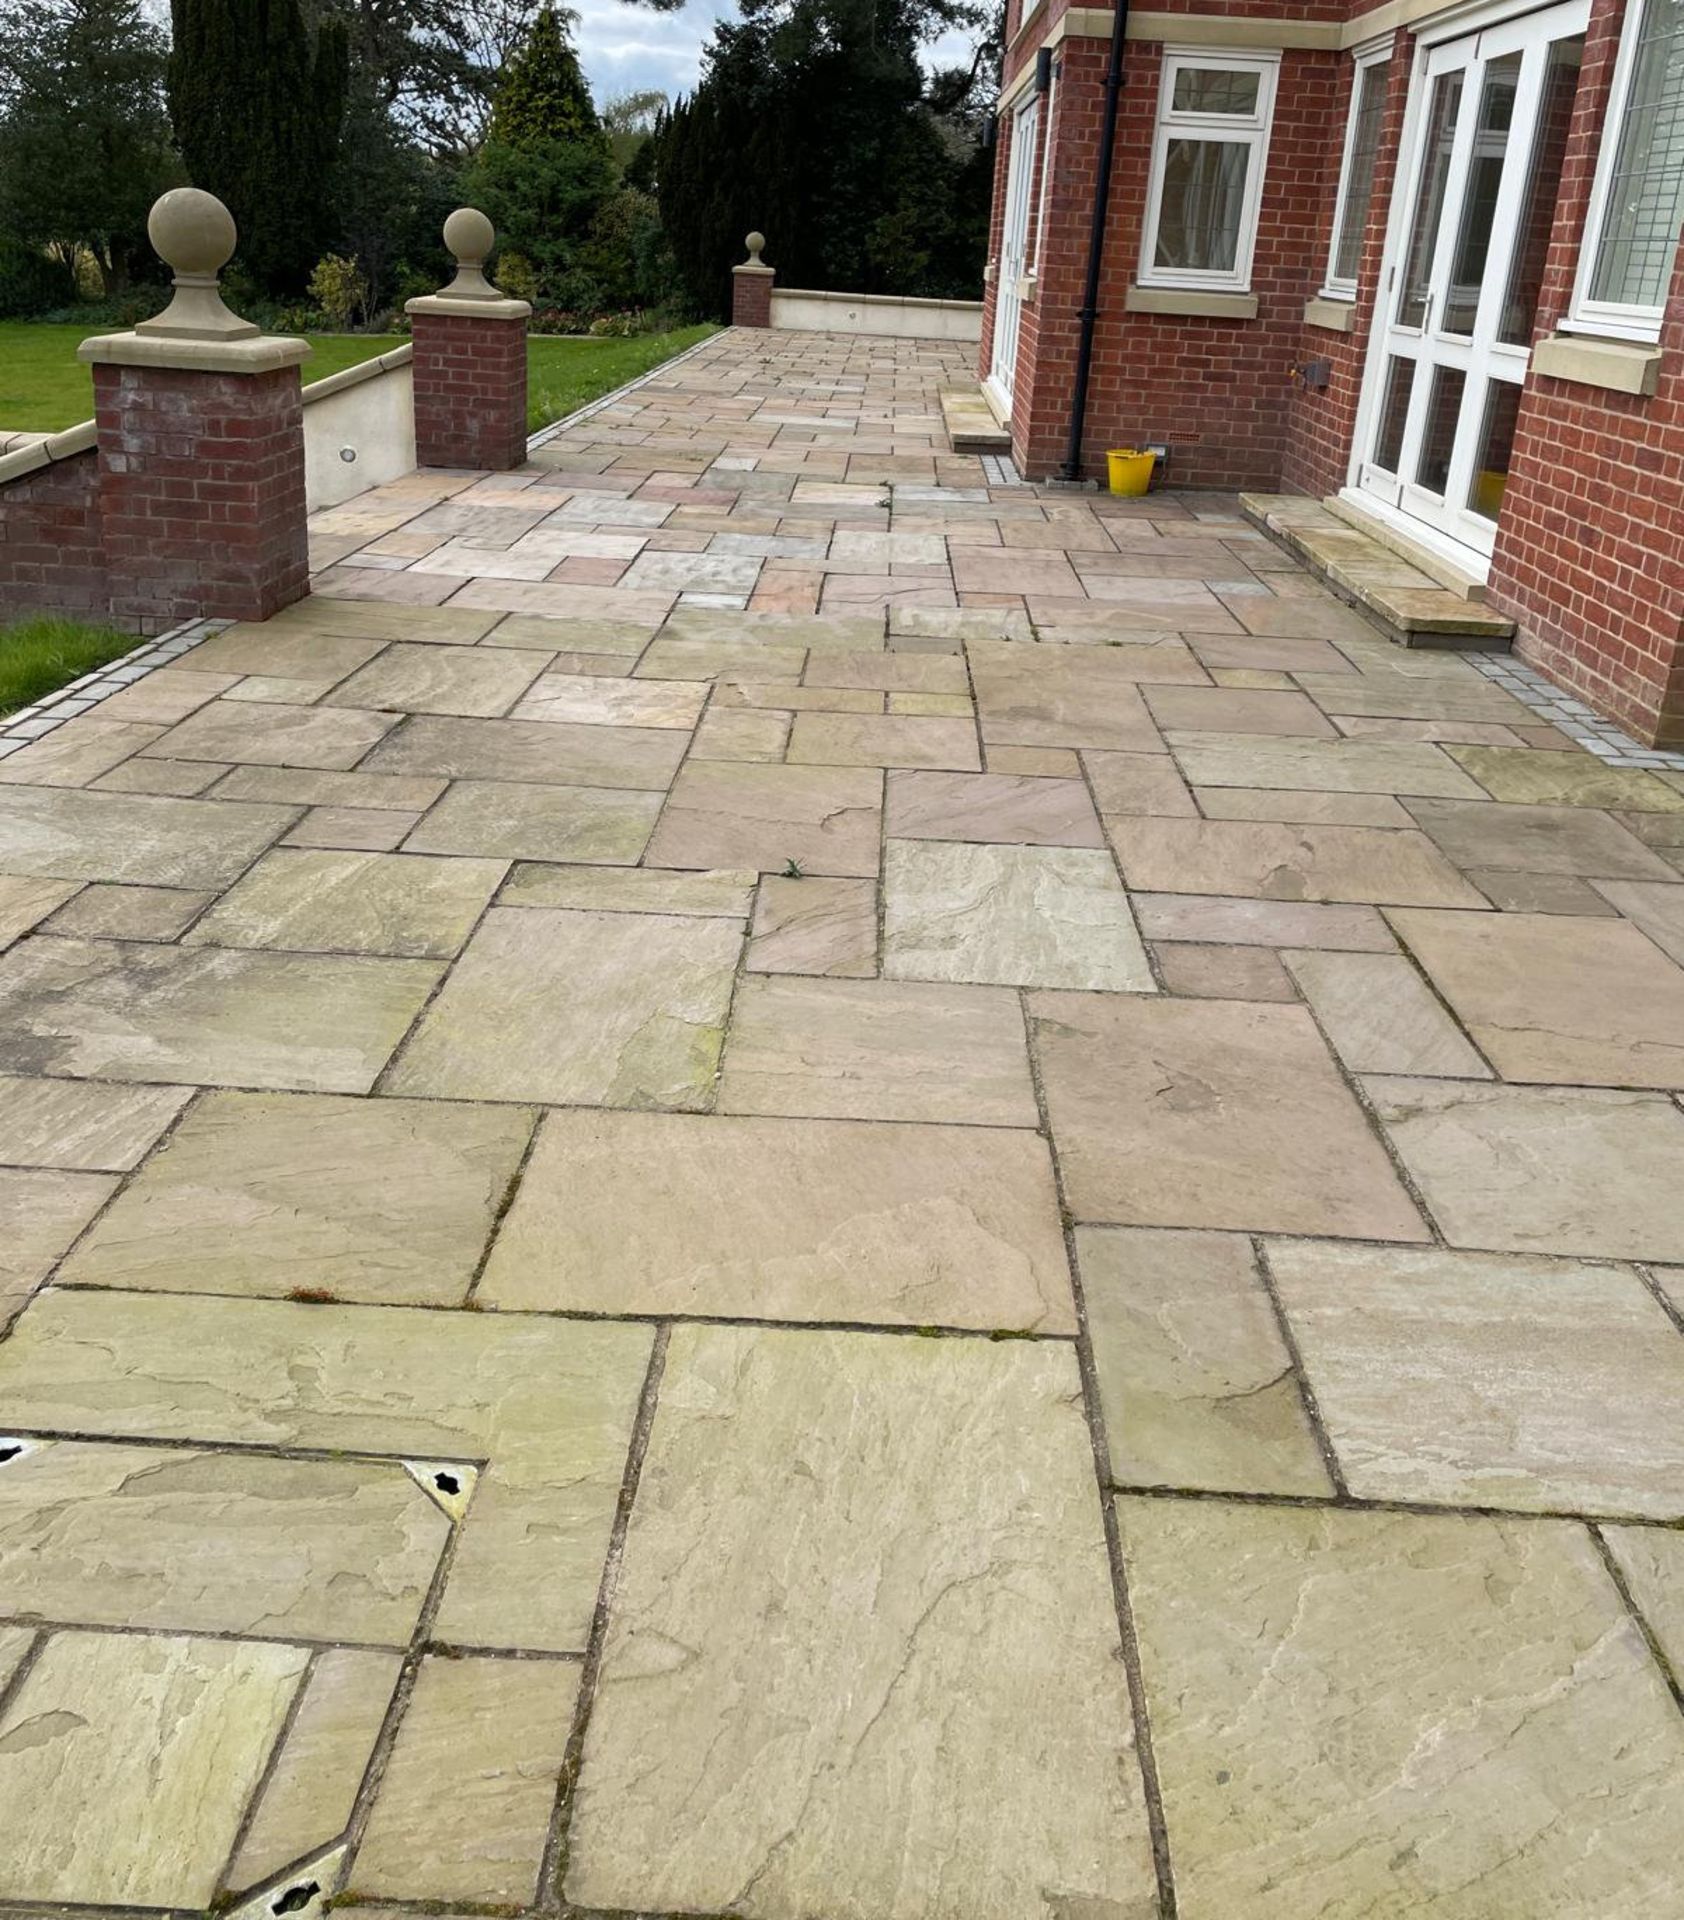 Large Quantity of Yorkstone Paving - Over 340sqm - CL896 - NO VAT ON THE HAMMER - Location: Wilmslow - Image 10 of 57